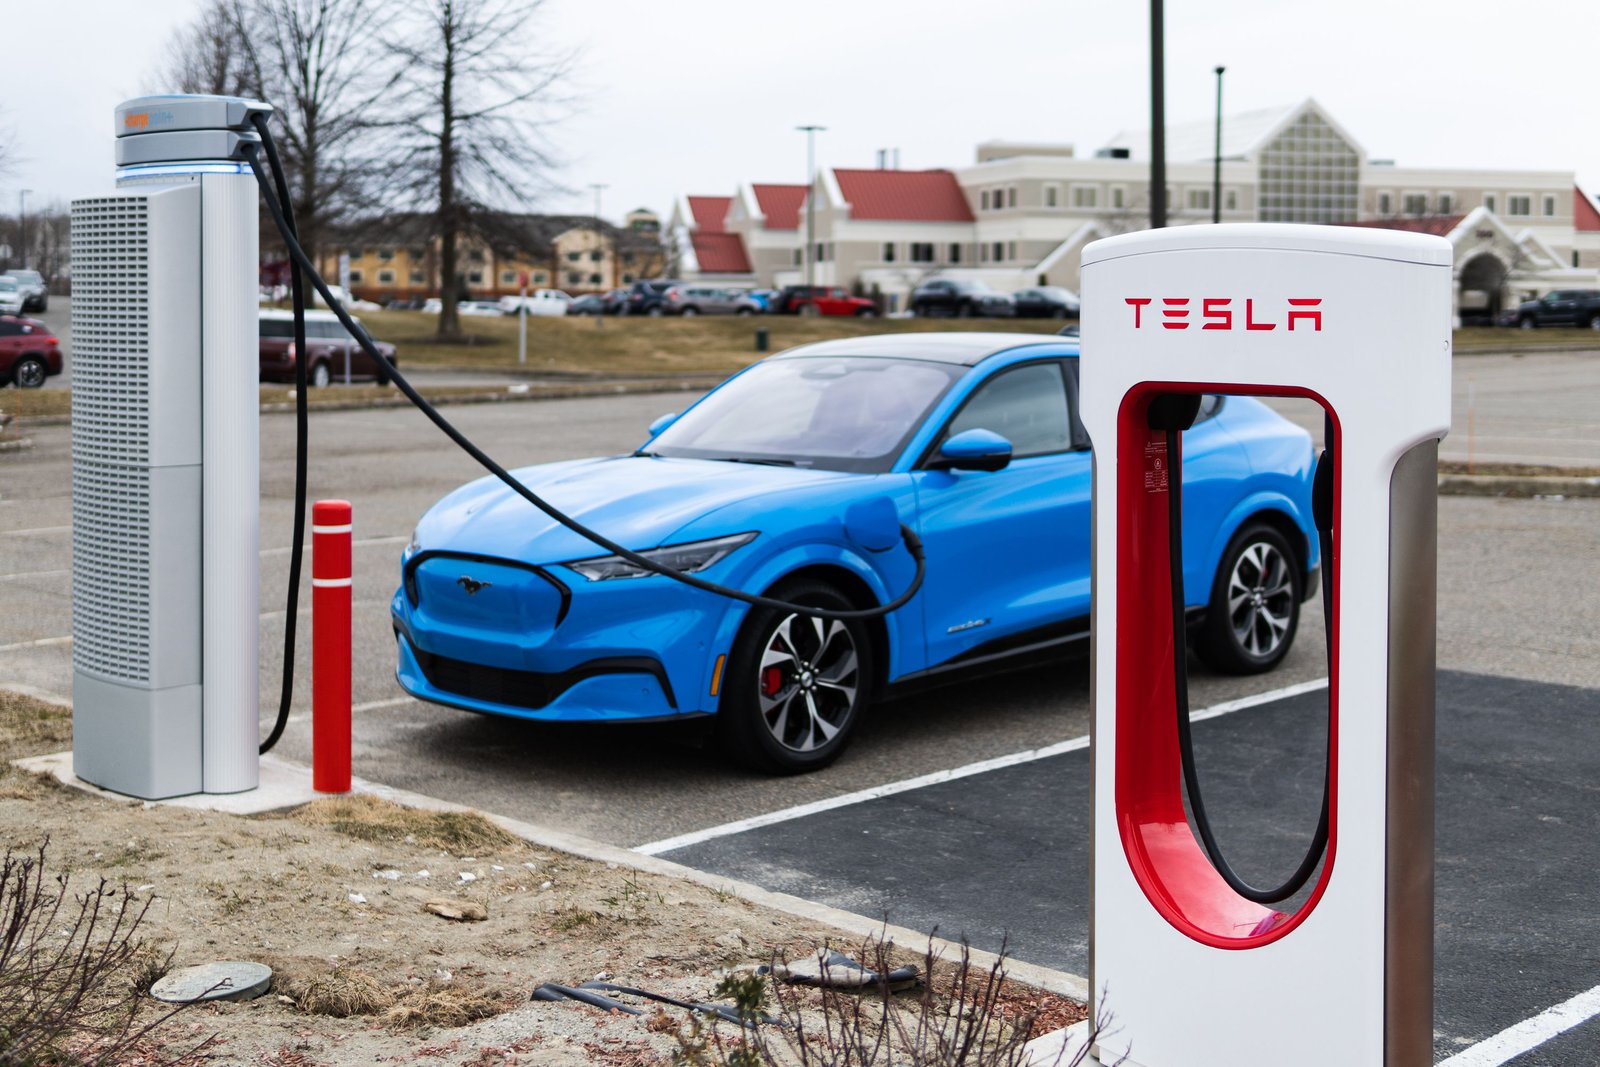 Ford Introduces Tesla Supercharging for EVs, Paving the Way for Electric Vehicle Revolution